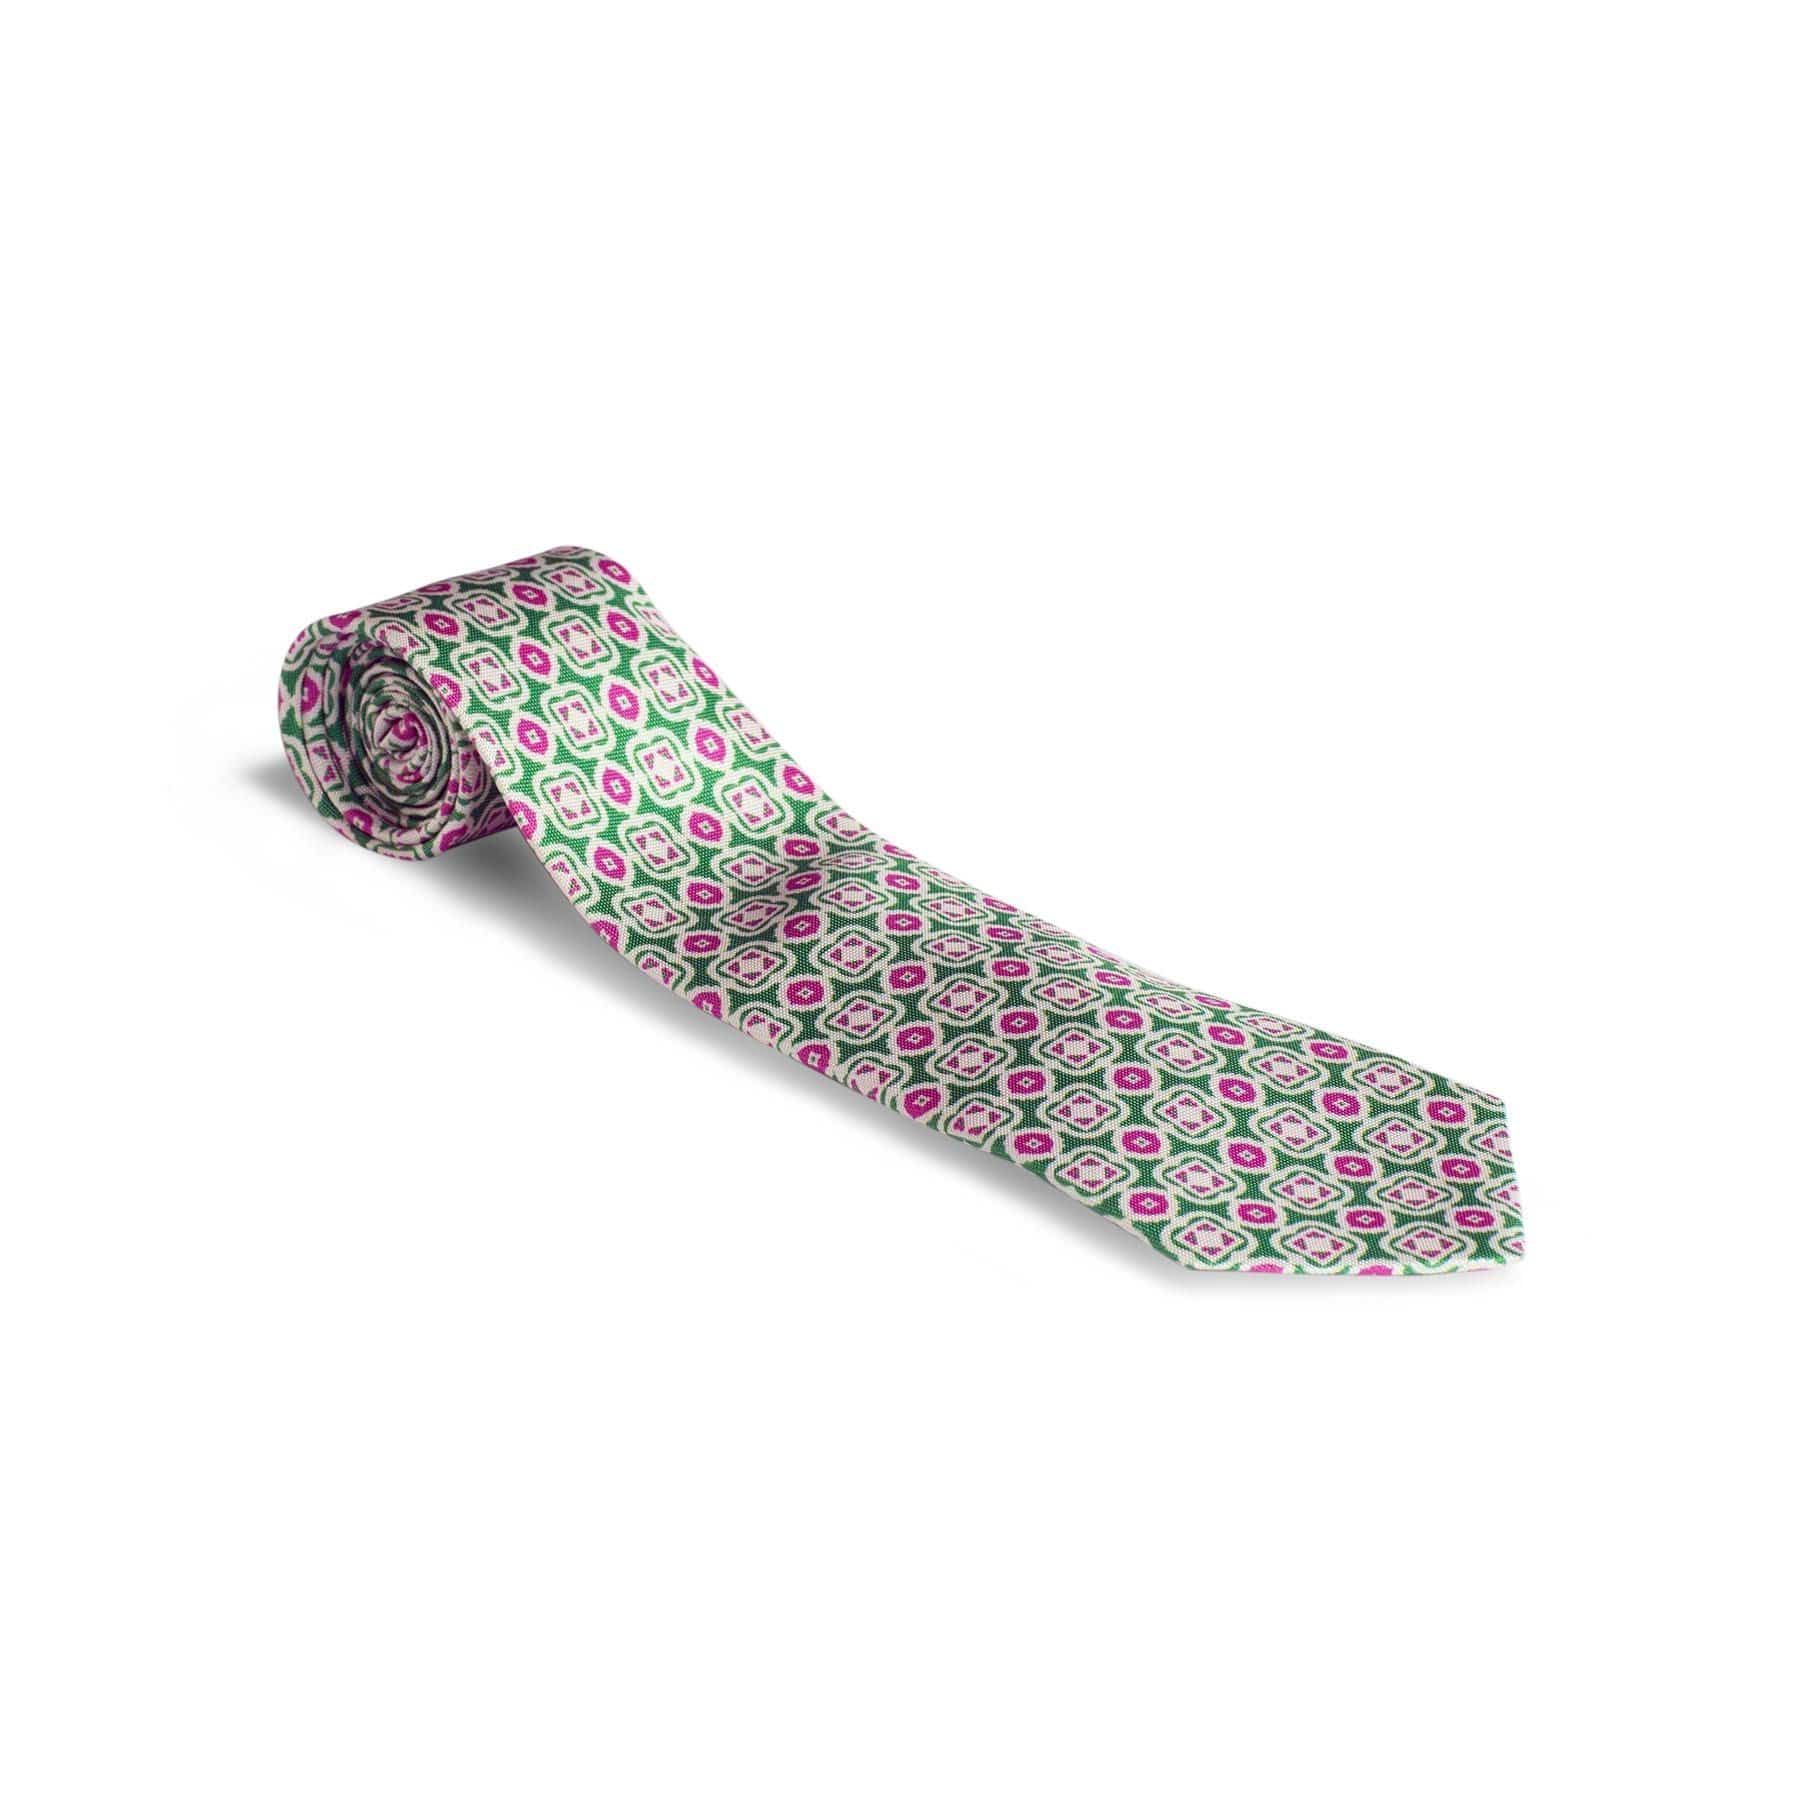 Petronius Ciao Ties in Green Squares - AXEL'S